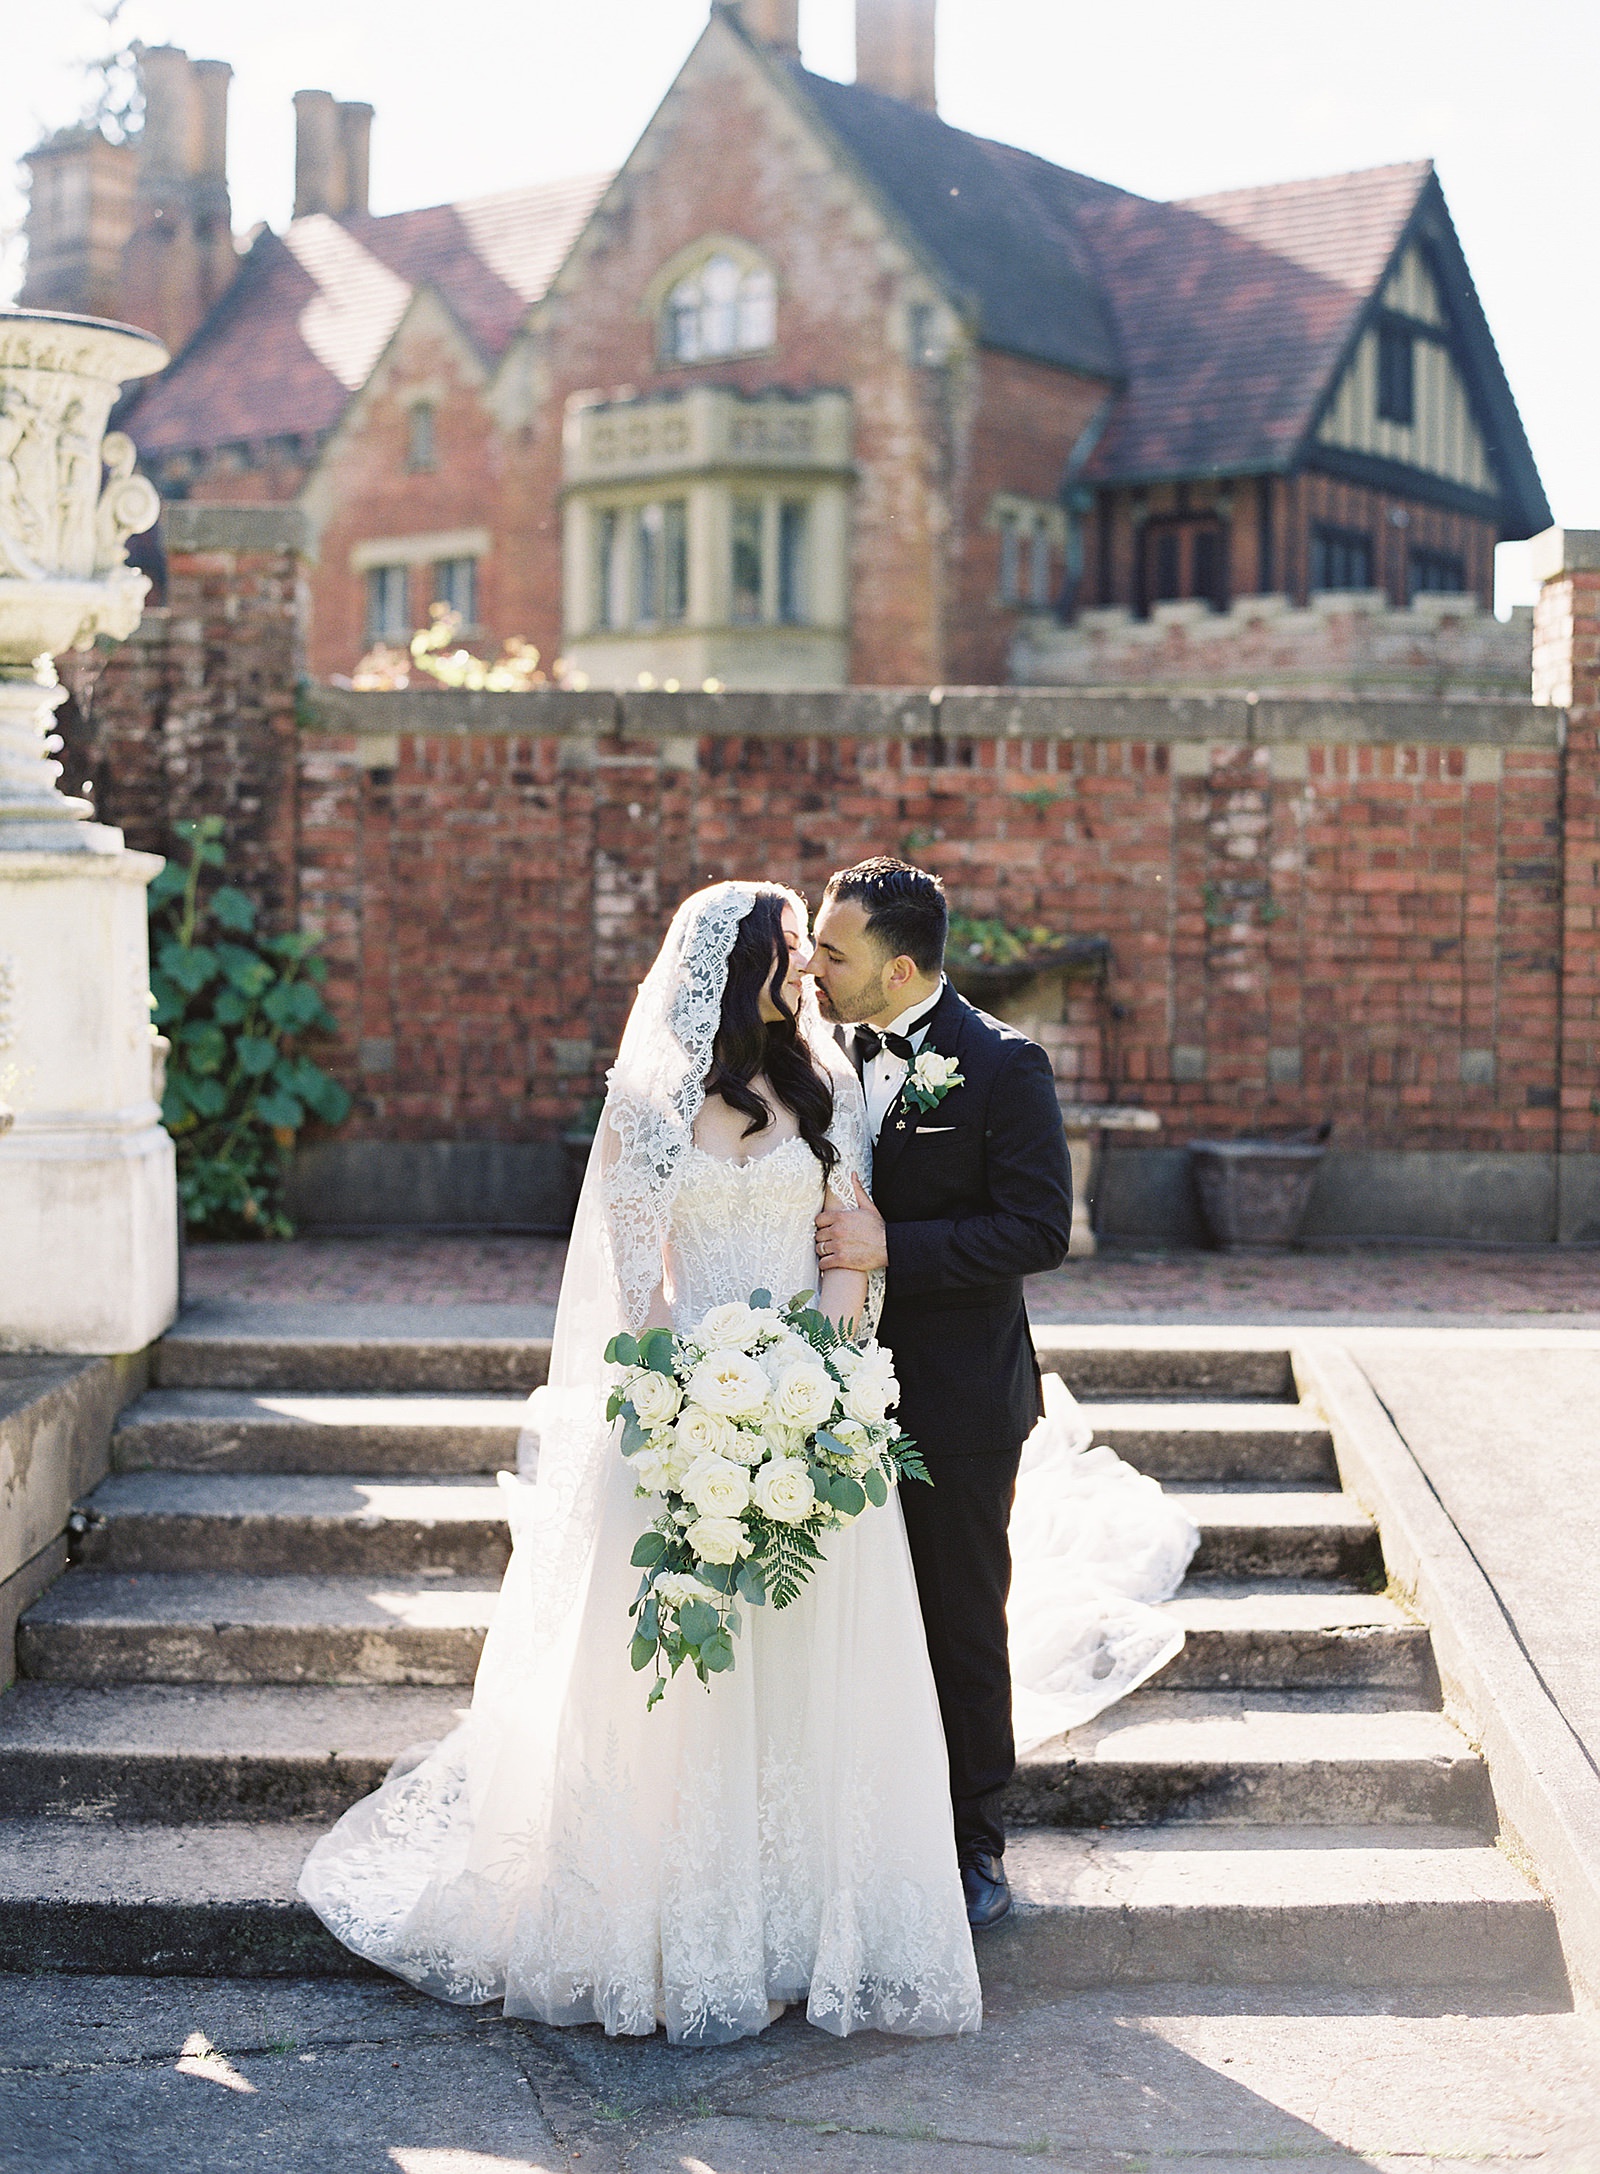 Bride and groom kiss on the steps in front of Thornewood Castle - Jacqueline Benét Photography